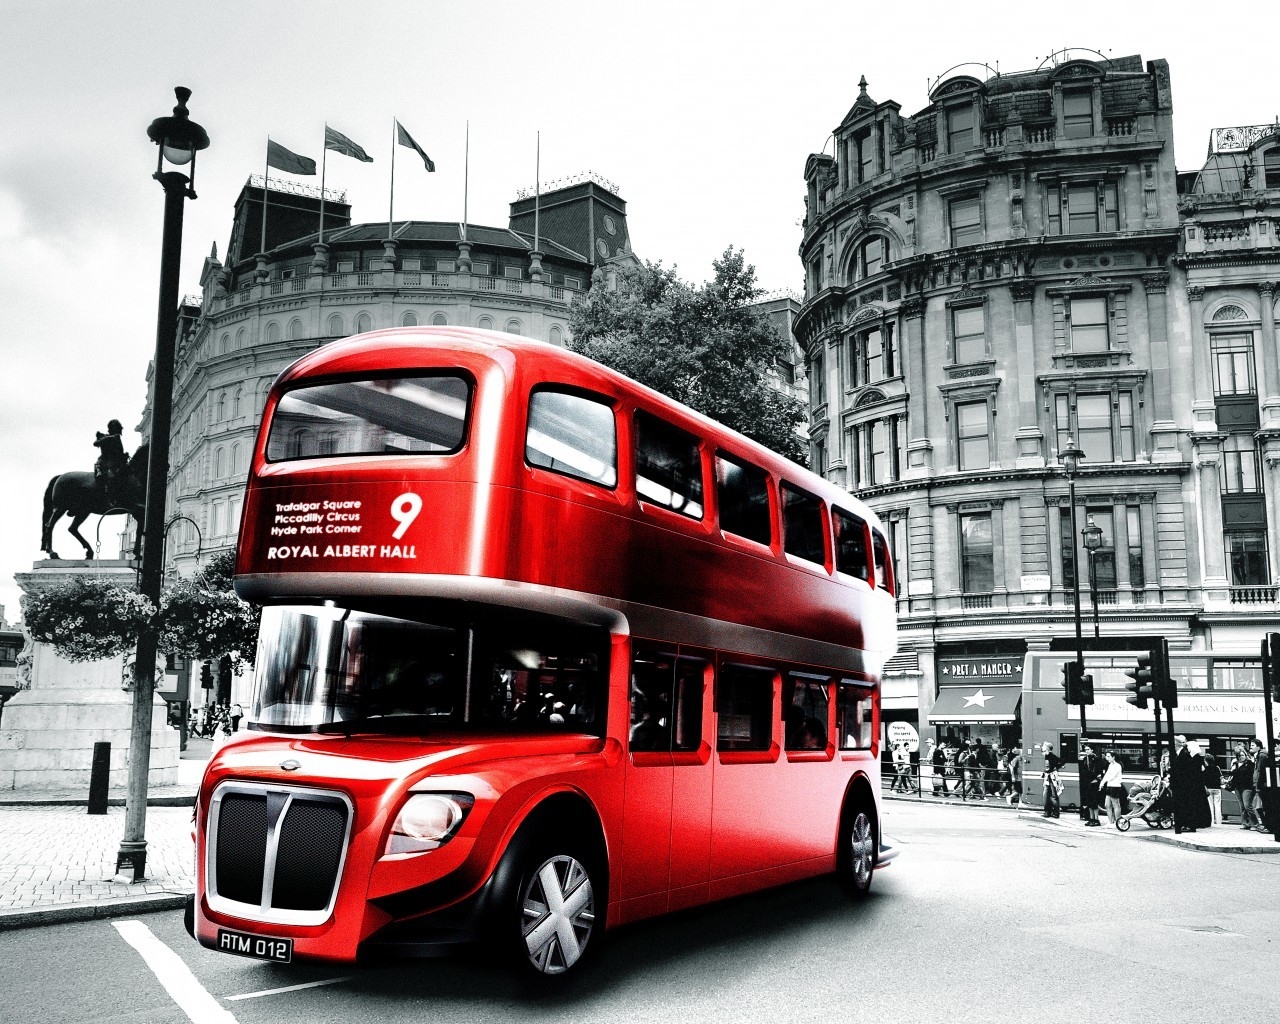 London Bus Design for 1280 x 1024 resolution